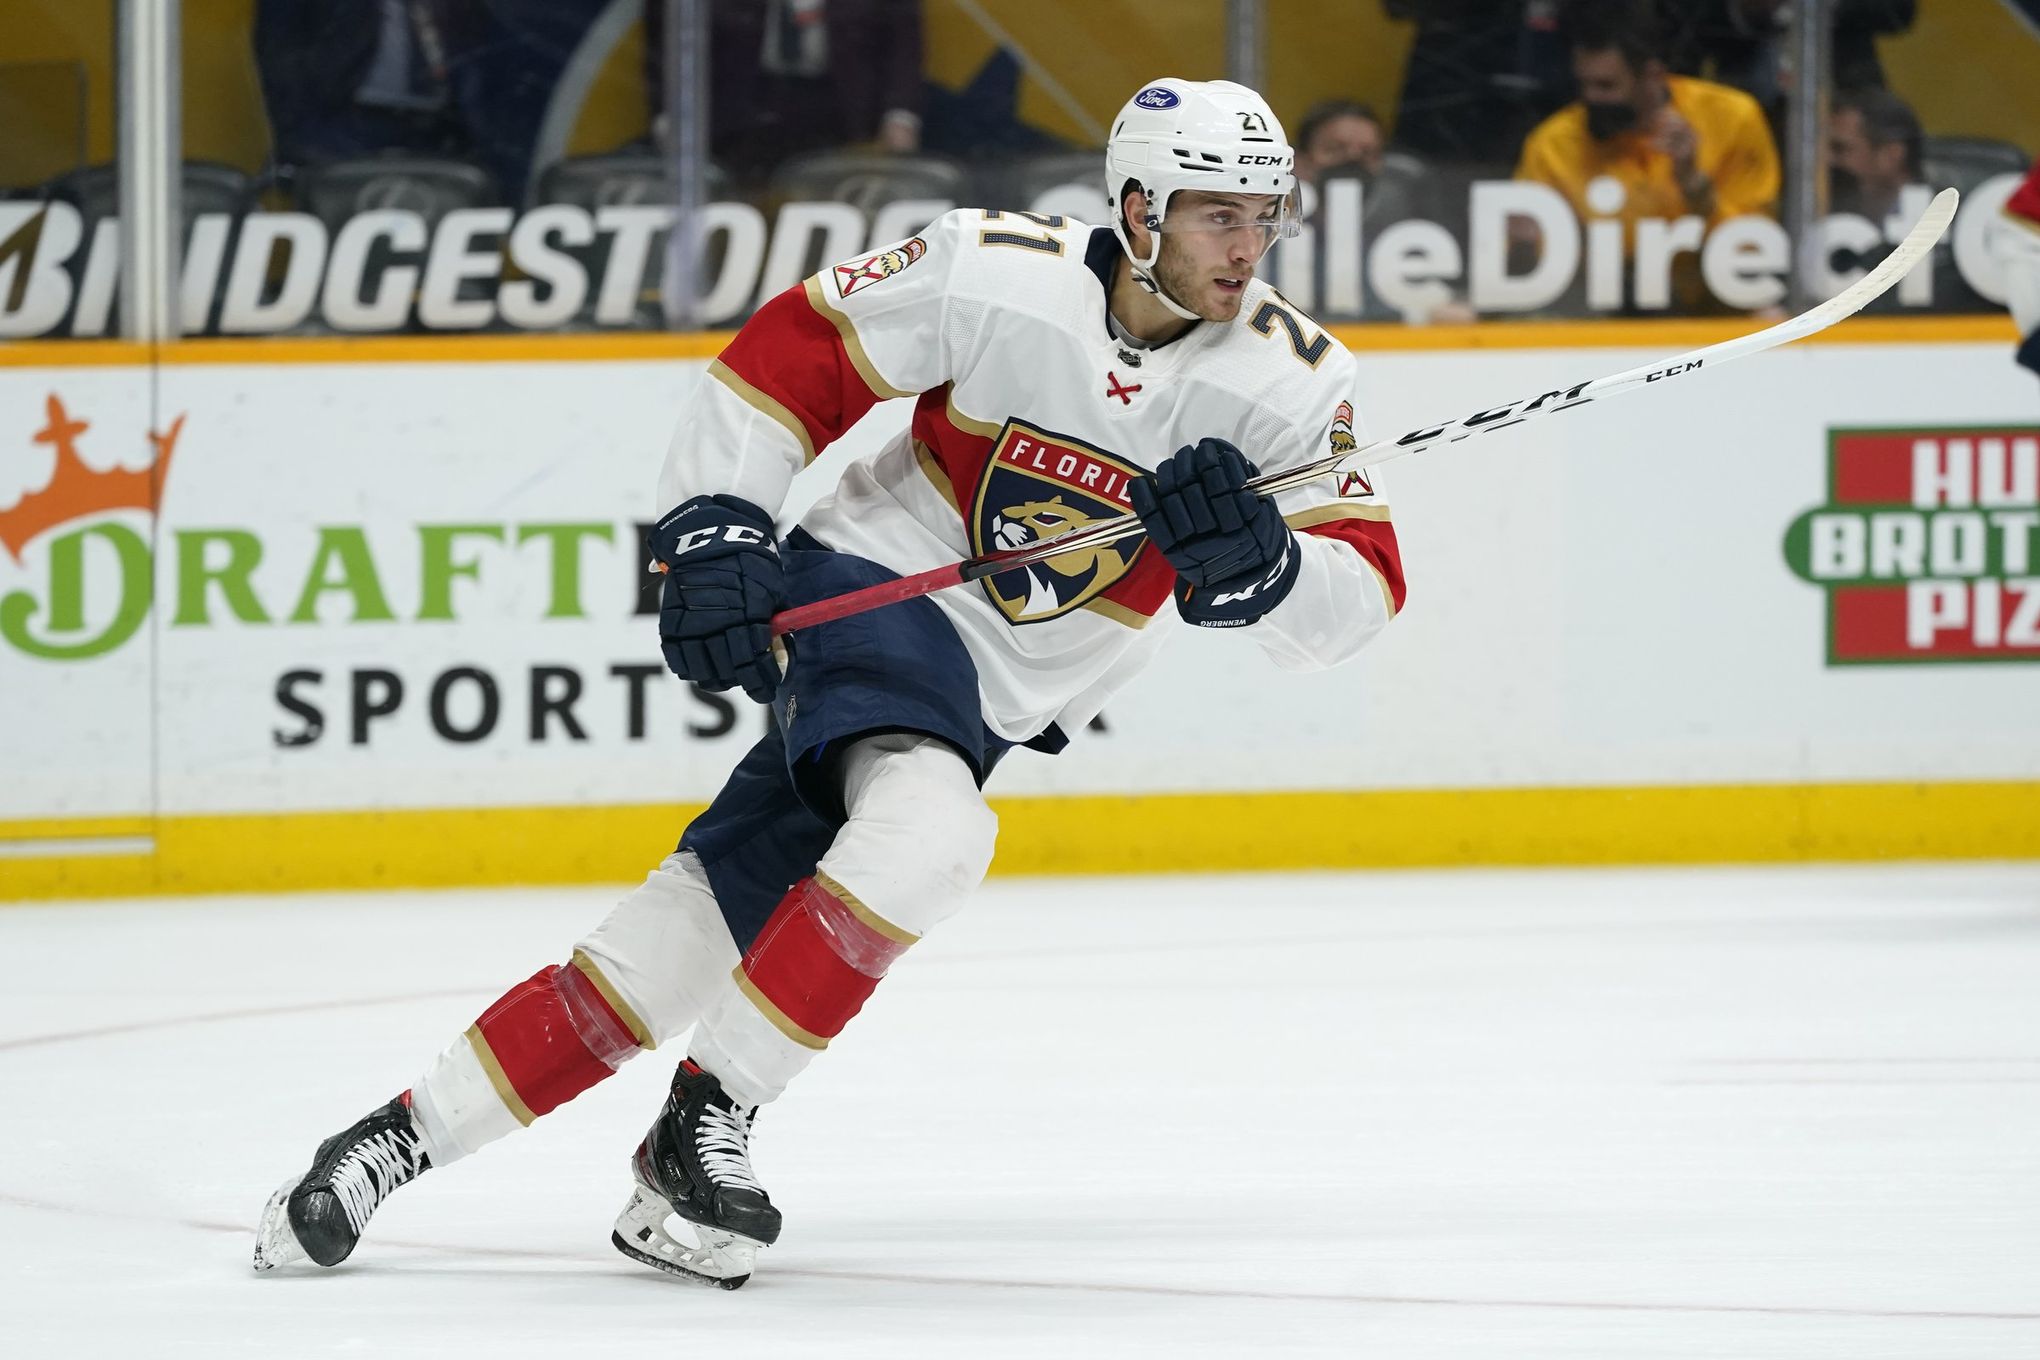 Florida Panthers roster 2023: Projected lineup combinations